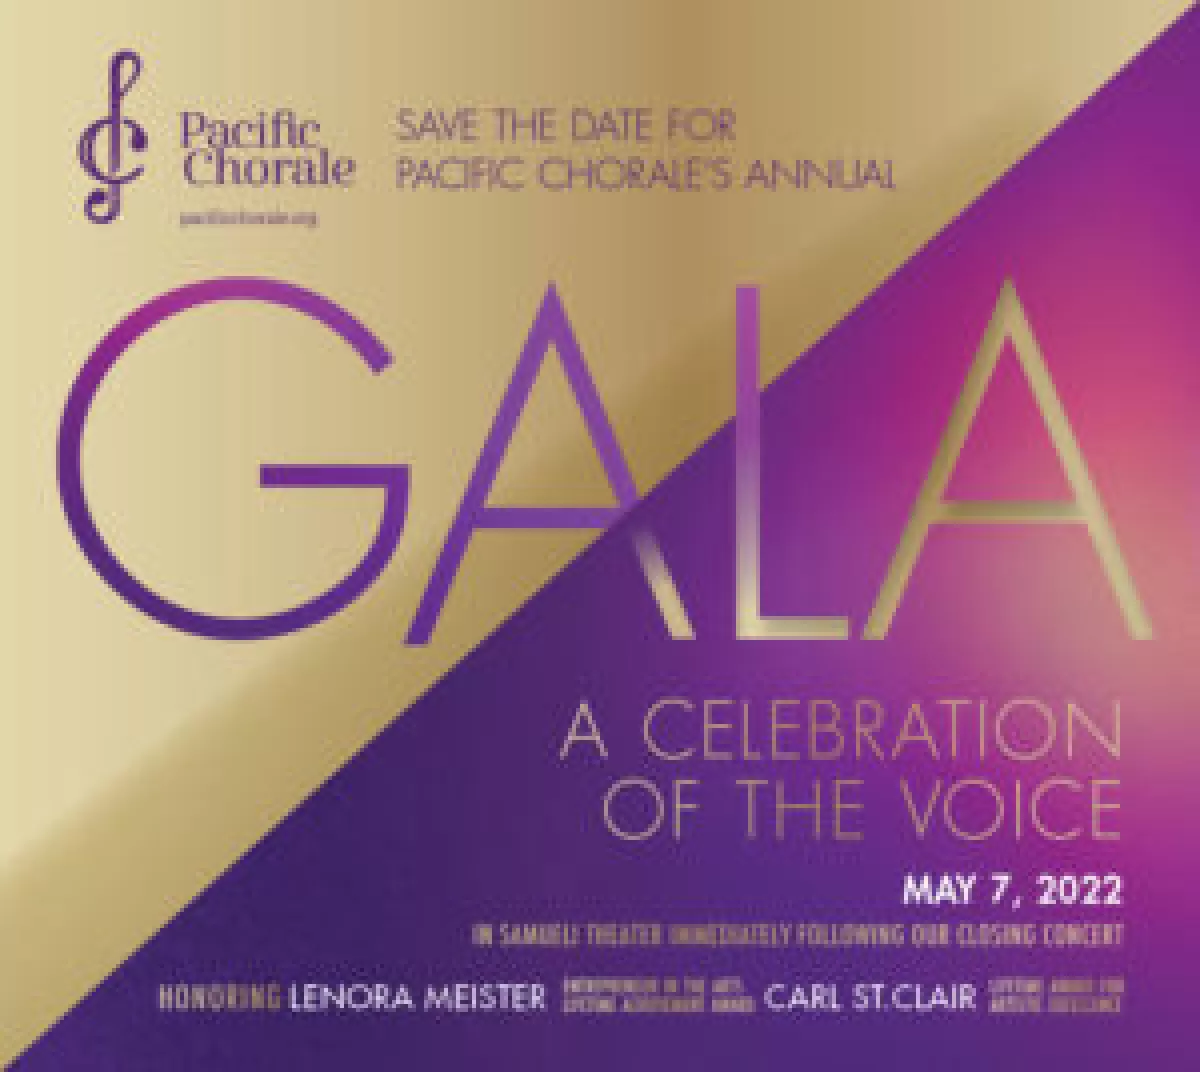 Join us after the concert for our Annual Gala!